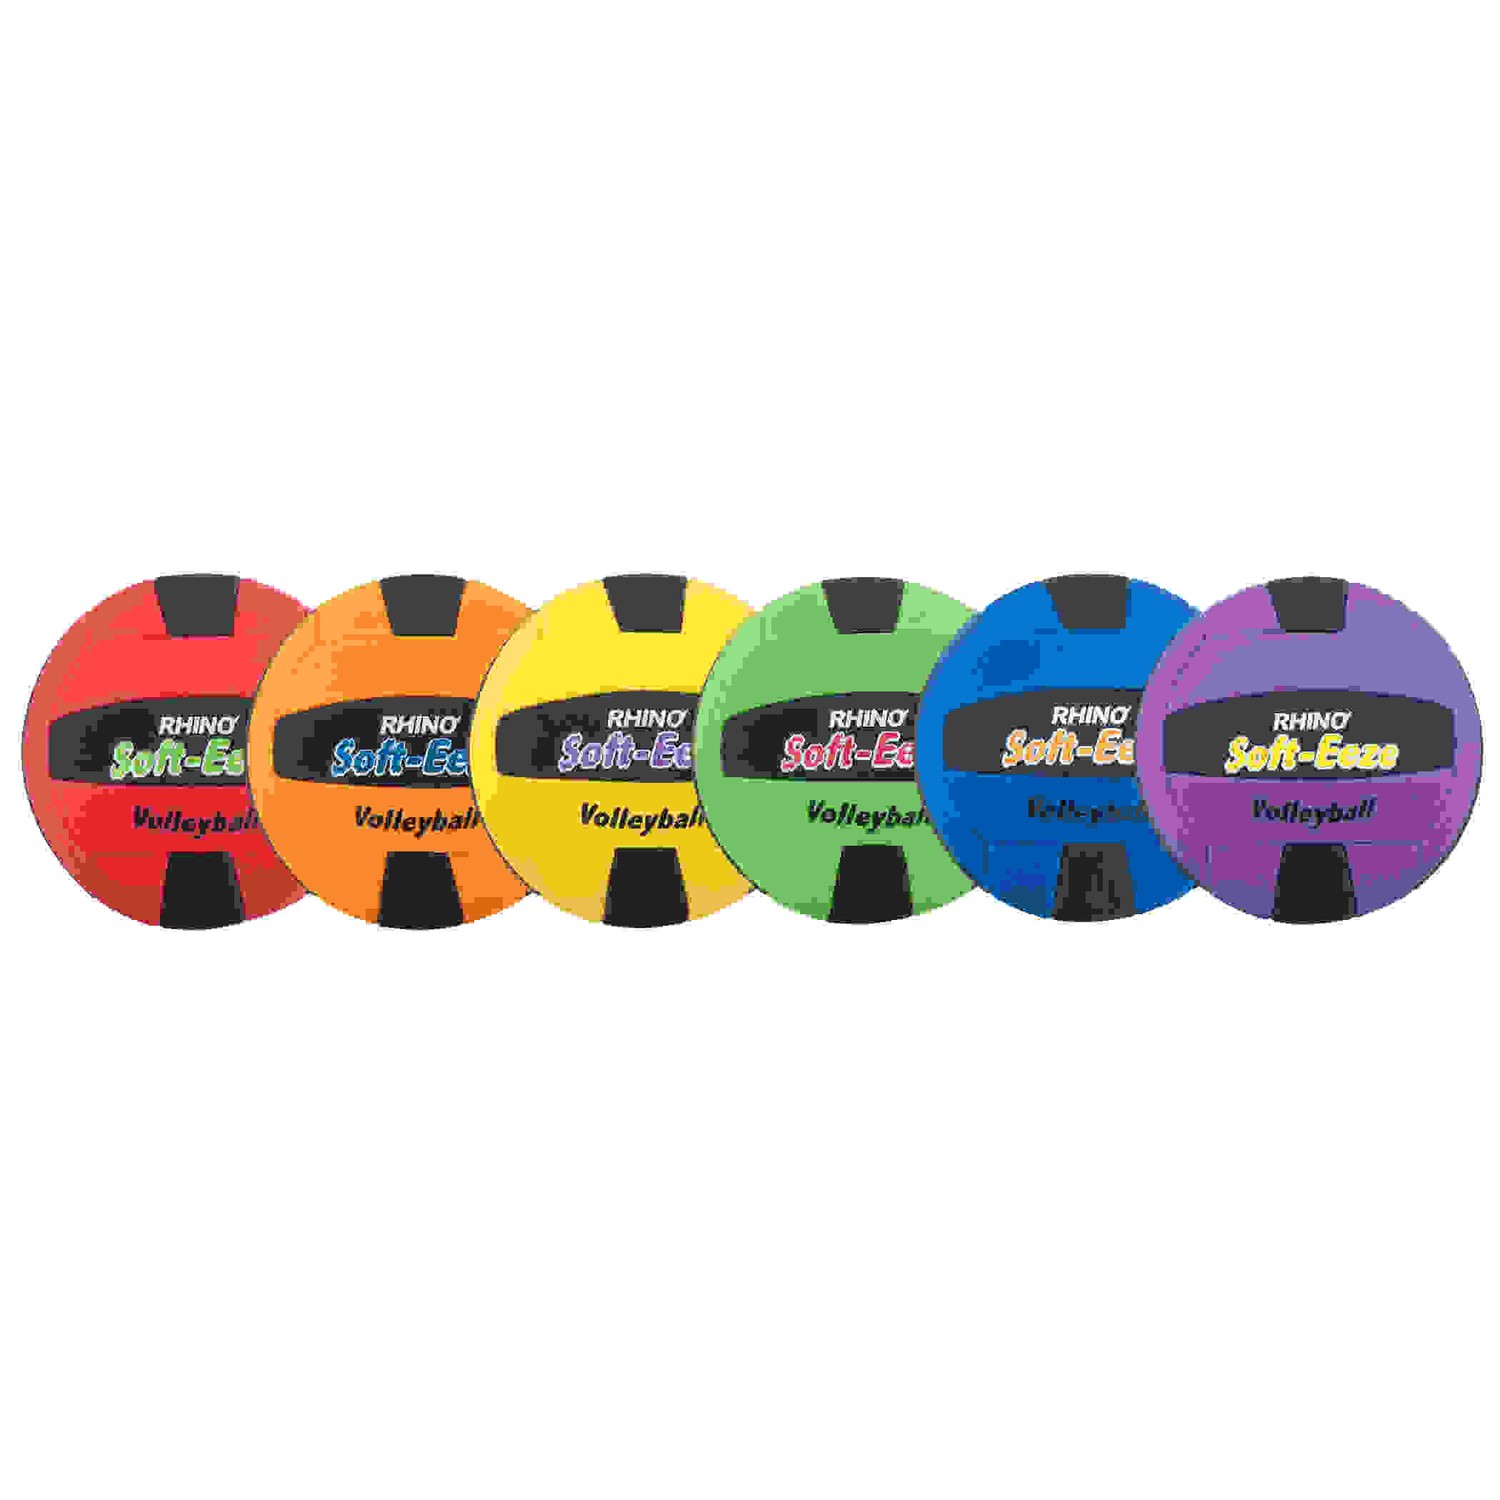 Rhino Softeeze Volleyball Set, Assorted Colors, Set of 6